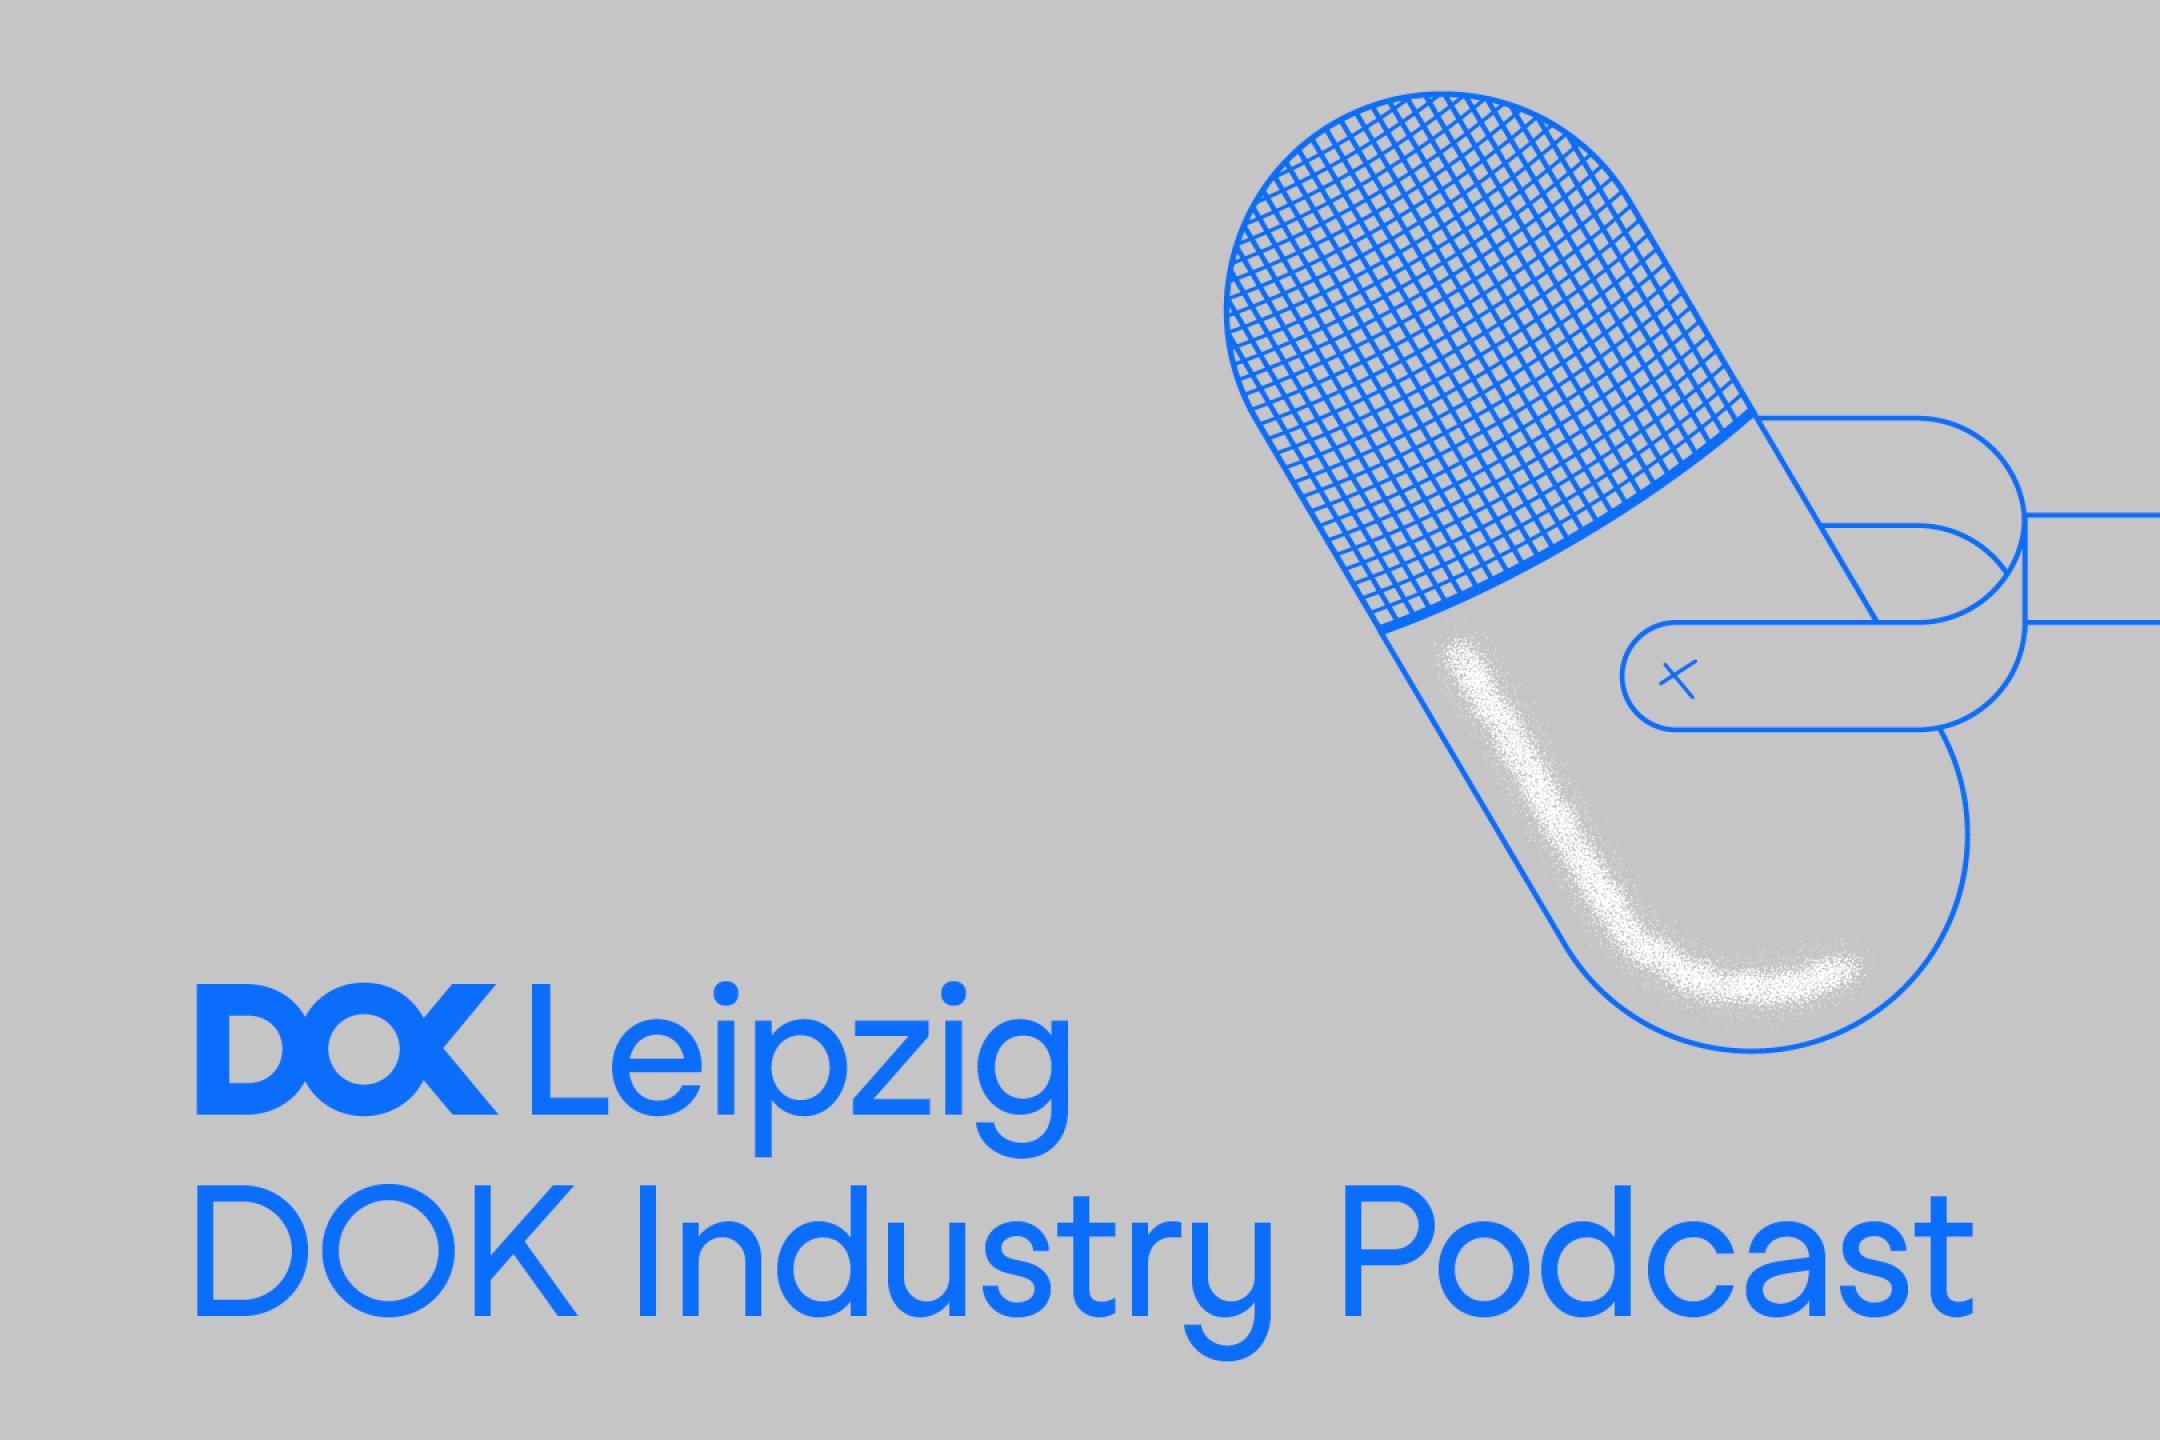 A text graphic with blue letter on a grey background. At the right the illustration of a microphone. At the left the text: "DOK Industry Podcasts